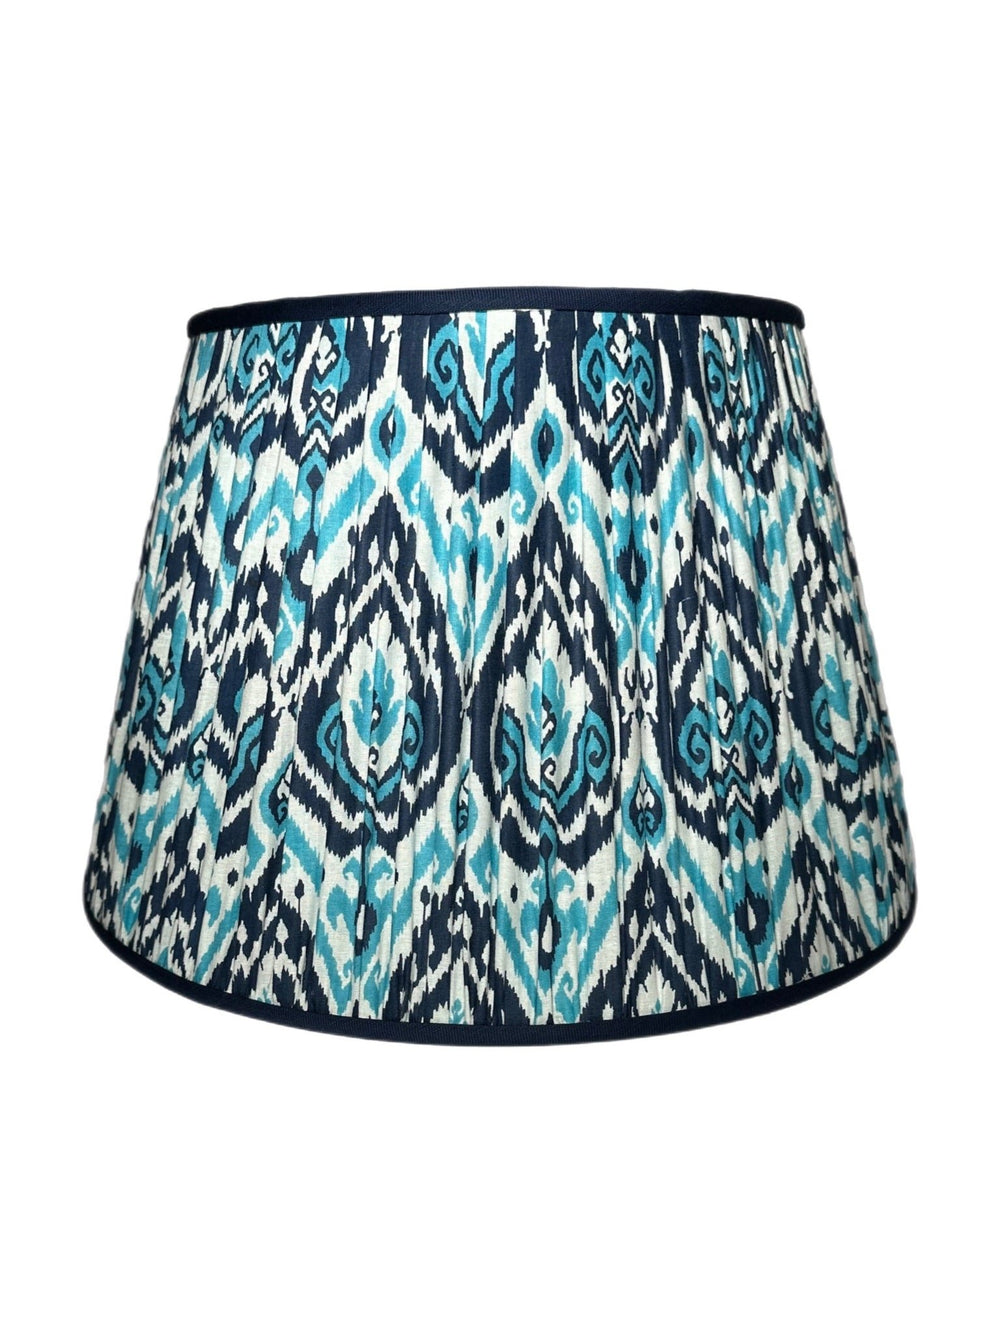 Gathered Sari Shade with Contrasting trim - Lux Lamp Shades